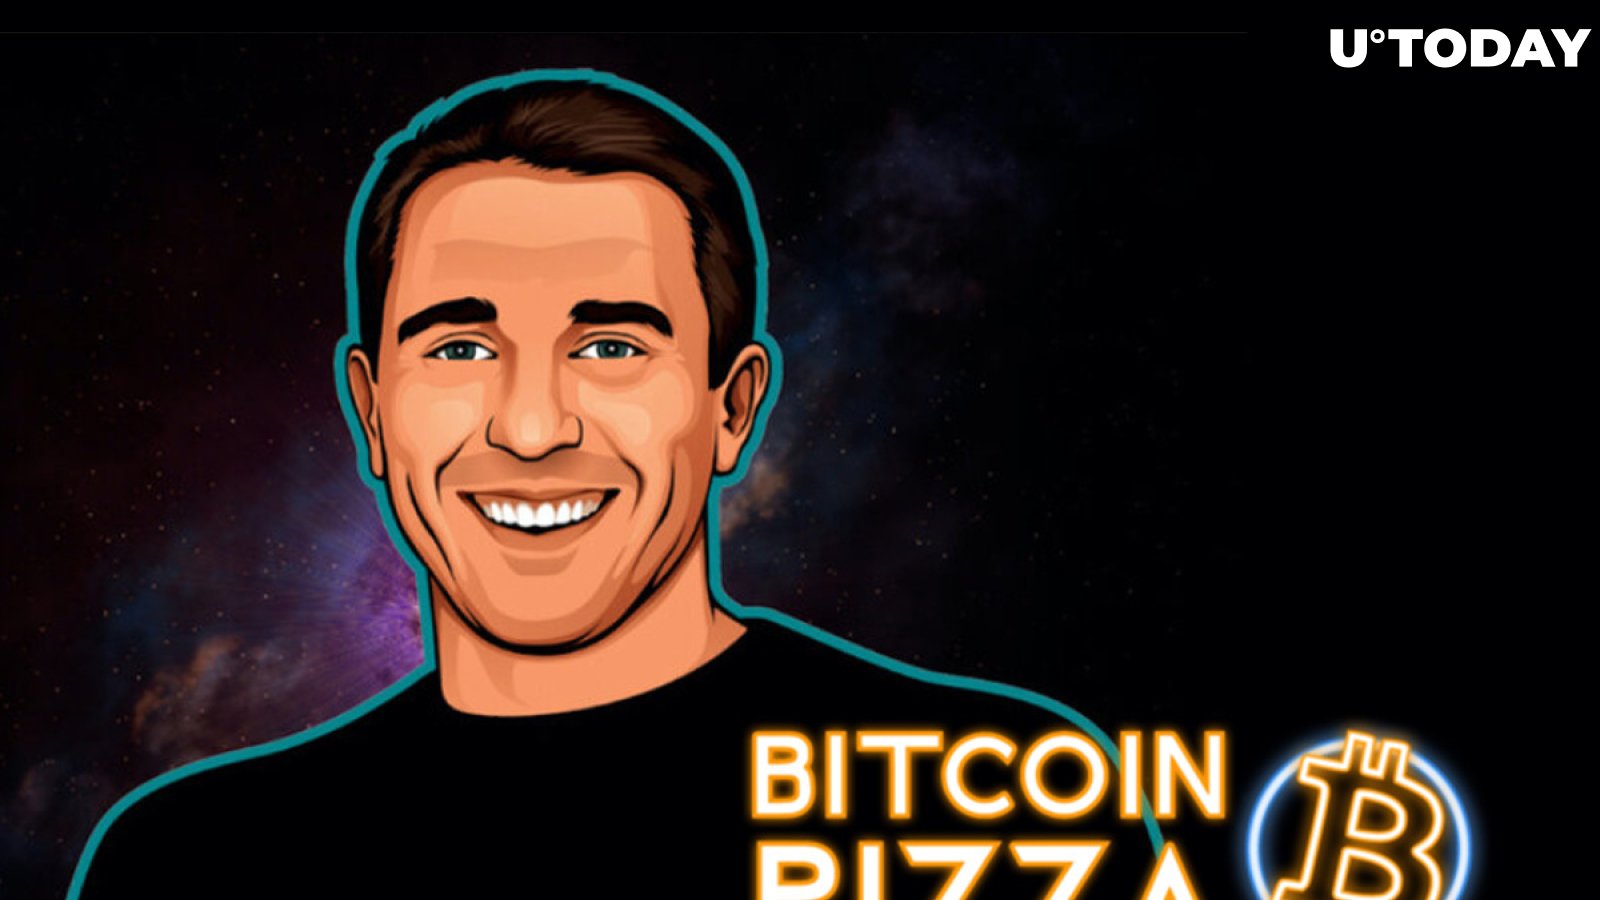 “Bitcoin Pizza” US National Brand to Launch This Week, Here’s What It Is About